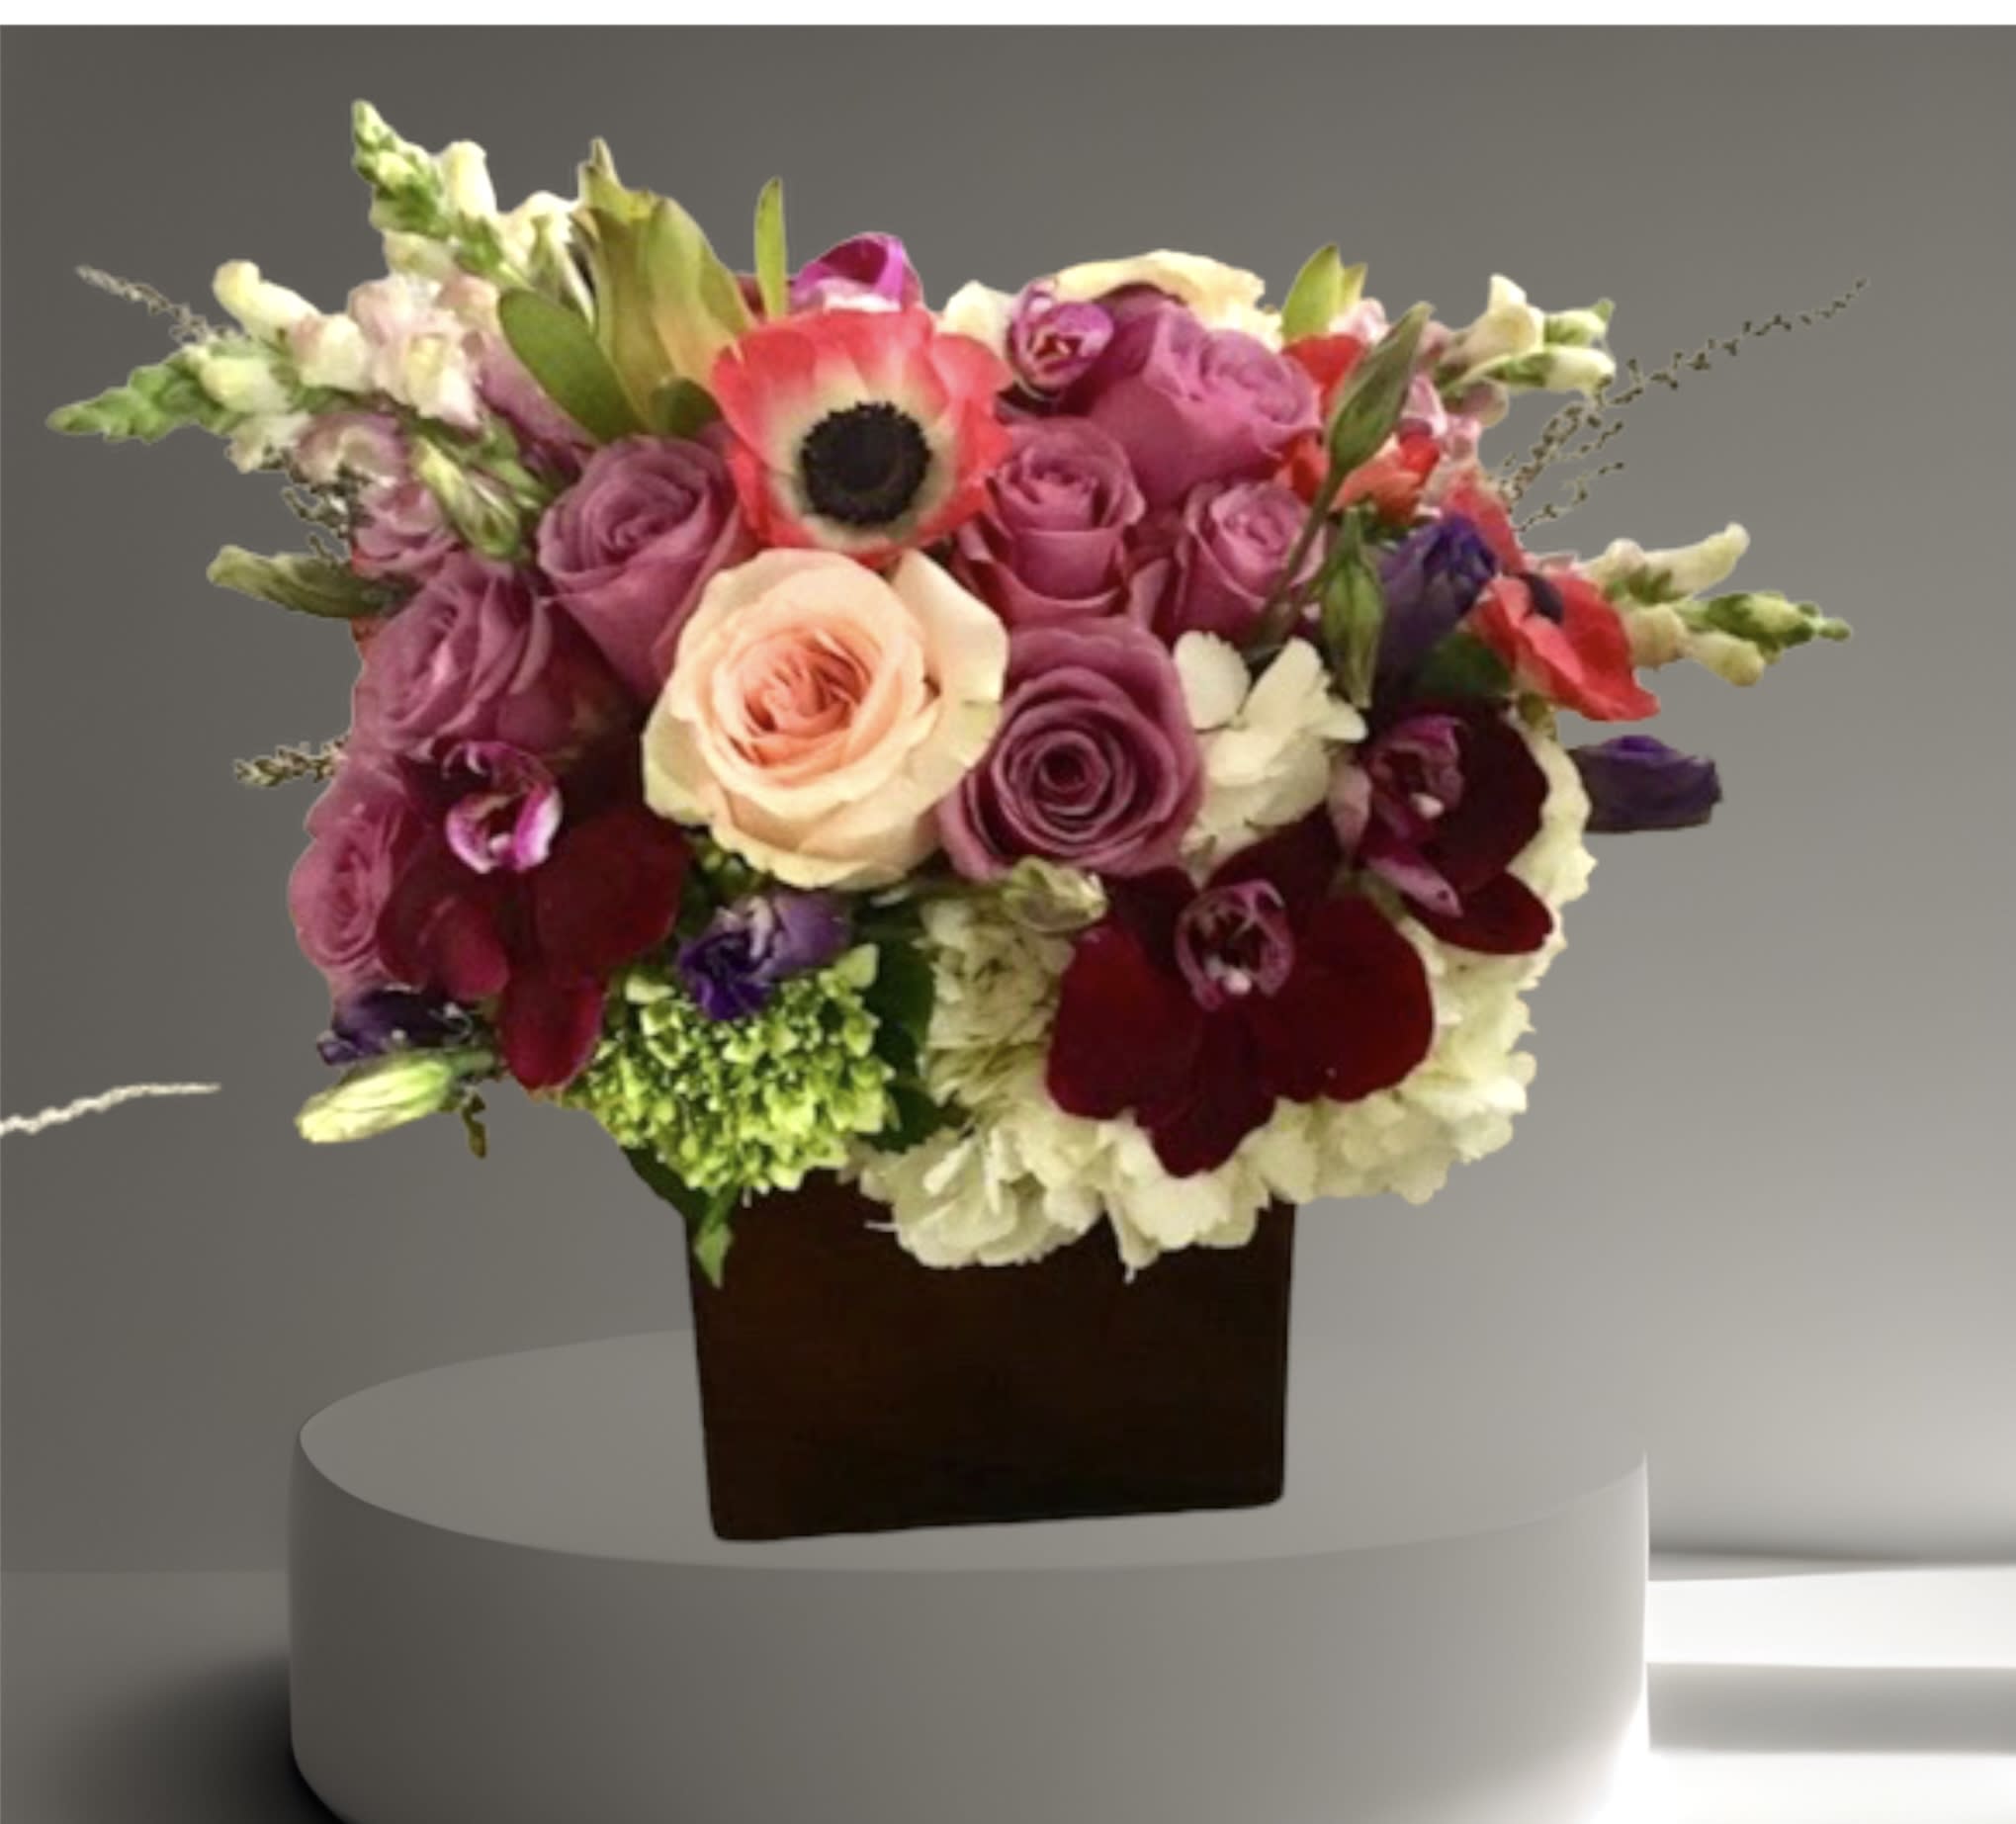 Purple Perfection - A beautiful arrangement in shades of purple and pink. Roses, hydrangea, orchids, snap dragon, and other seasonal flowers/foliage create a dramatic and unique gift.  